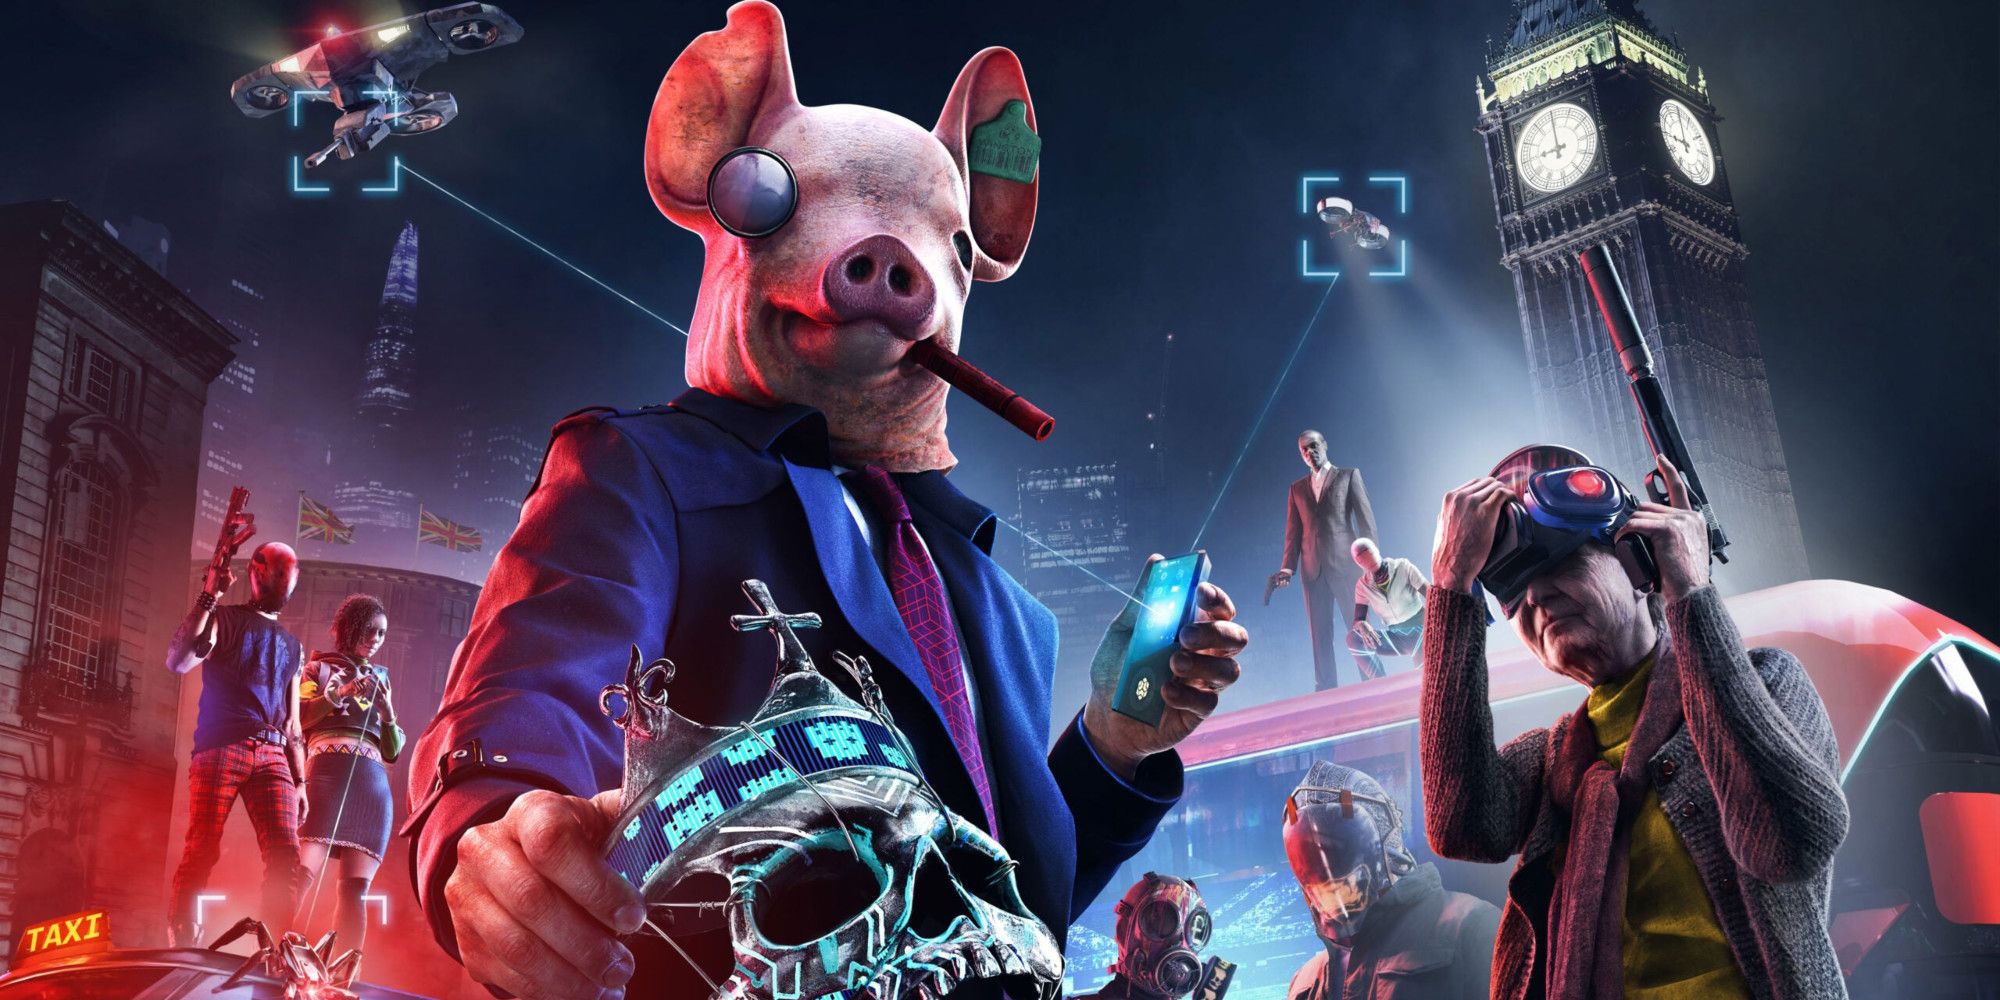 Watch Dogs Legion Receives Mysterious New Update After Ending